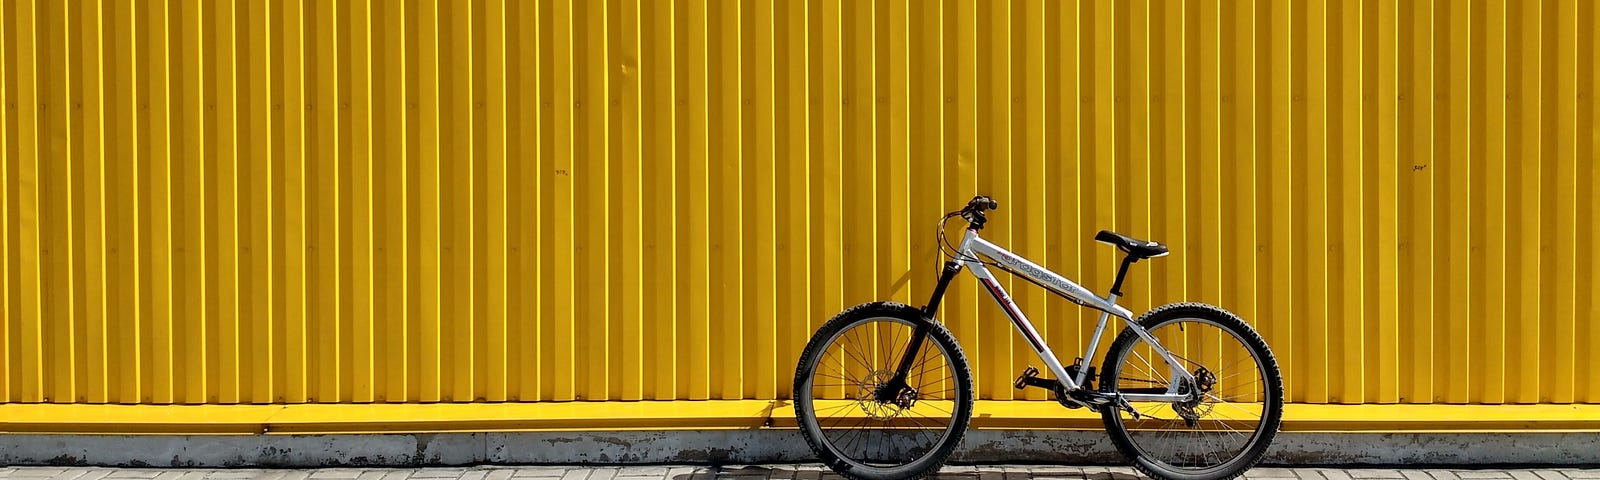 A bike leaning against a yellow wall, decorative image.